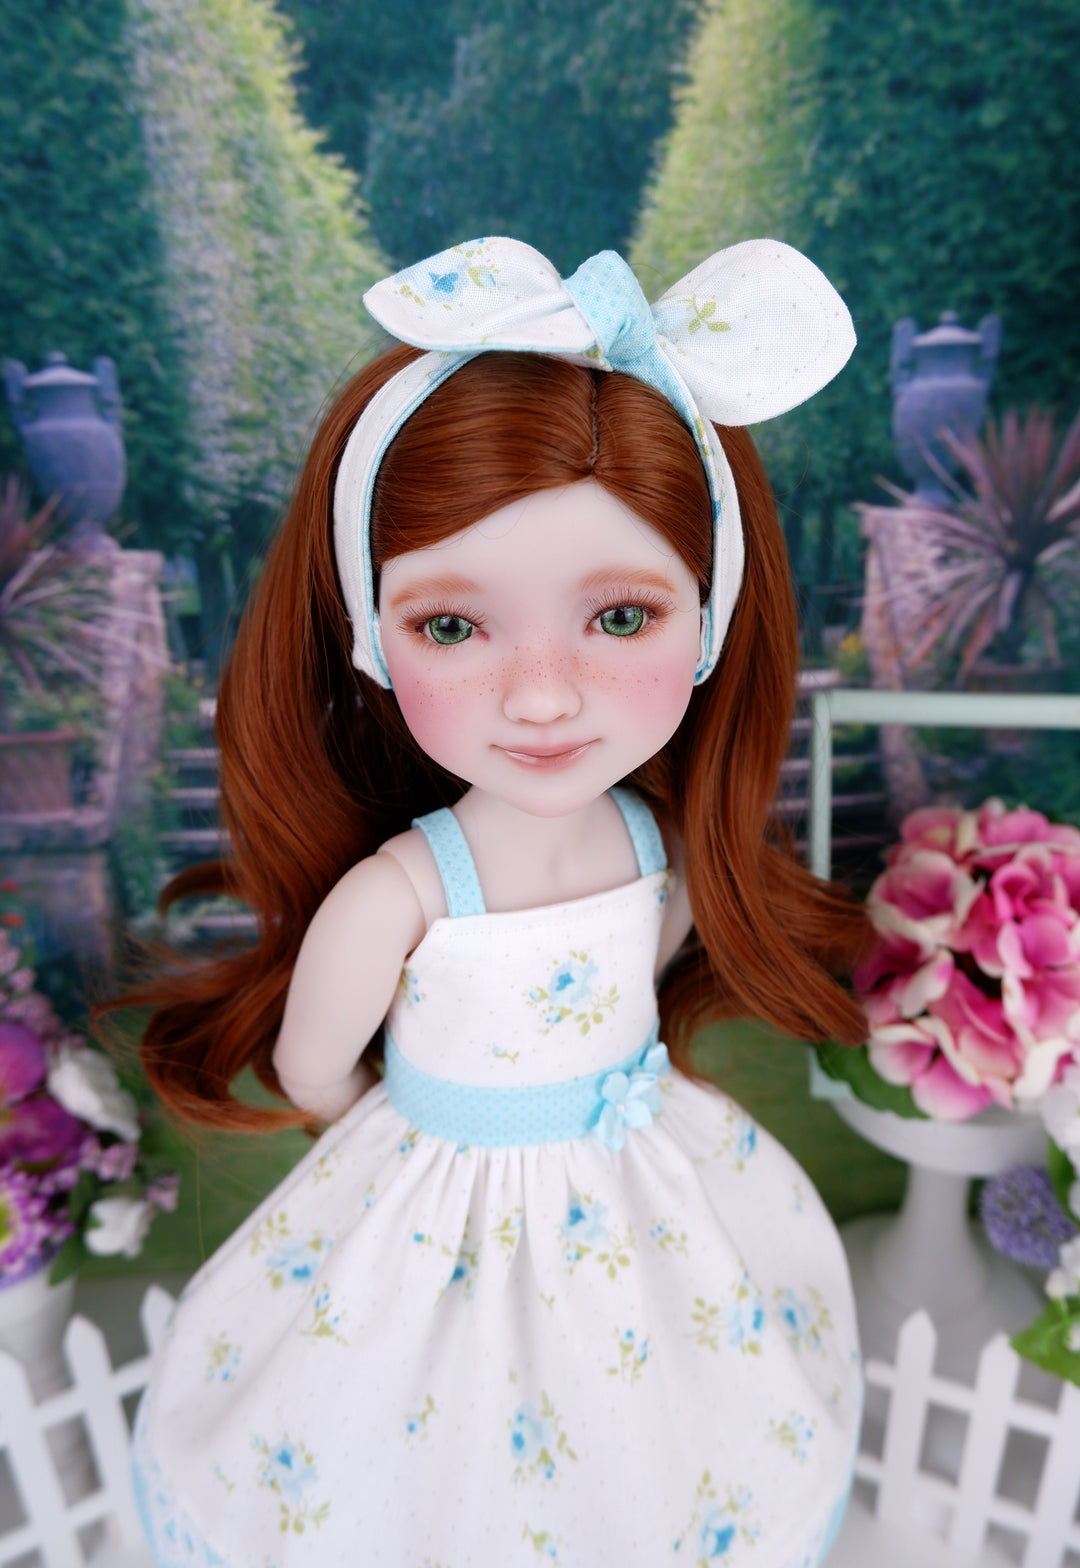 Soft Spring Rose - dress with sandals for Ruby Red Fashion Friends doll